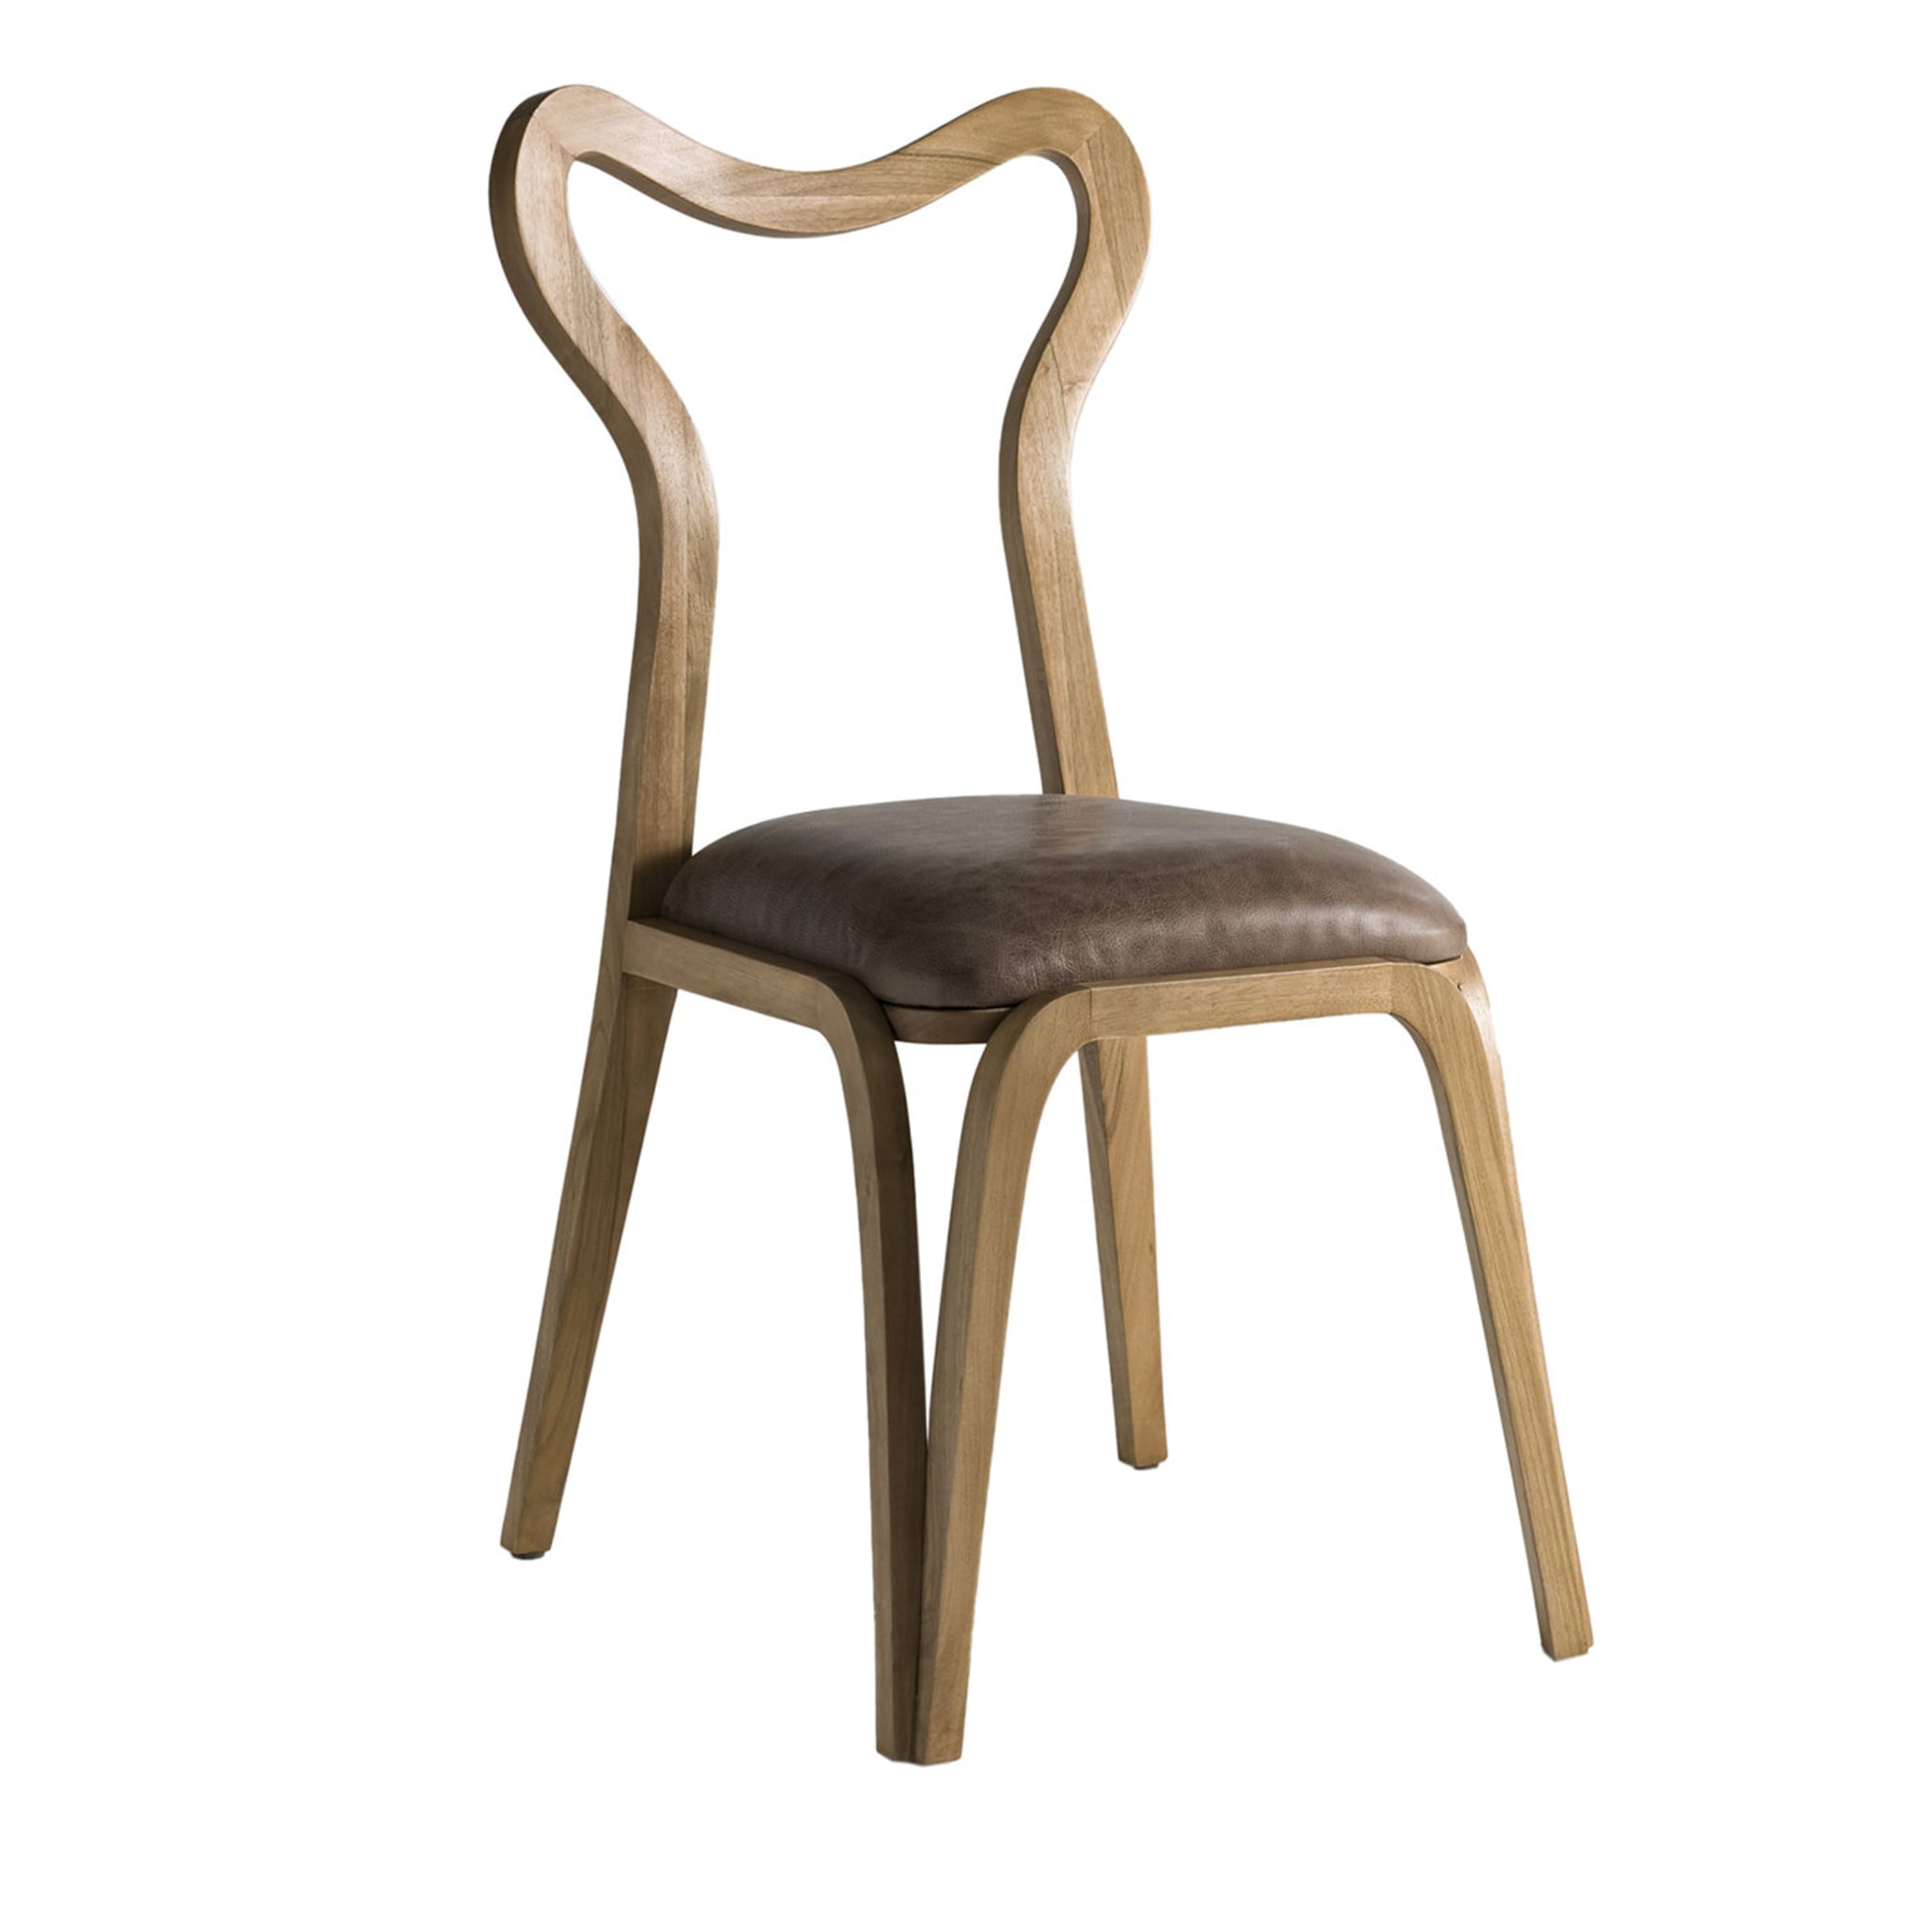 Daina Chair in Walnut with Open Back By Nigel Coates - Main view